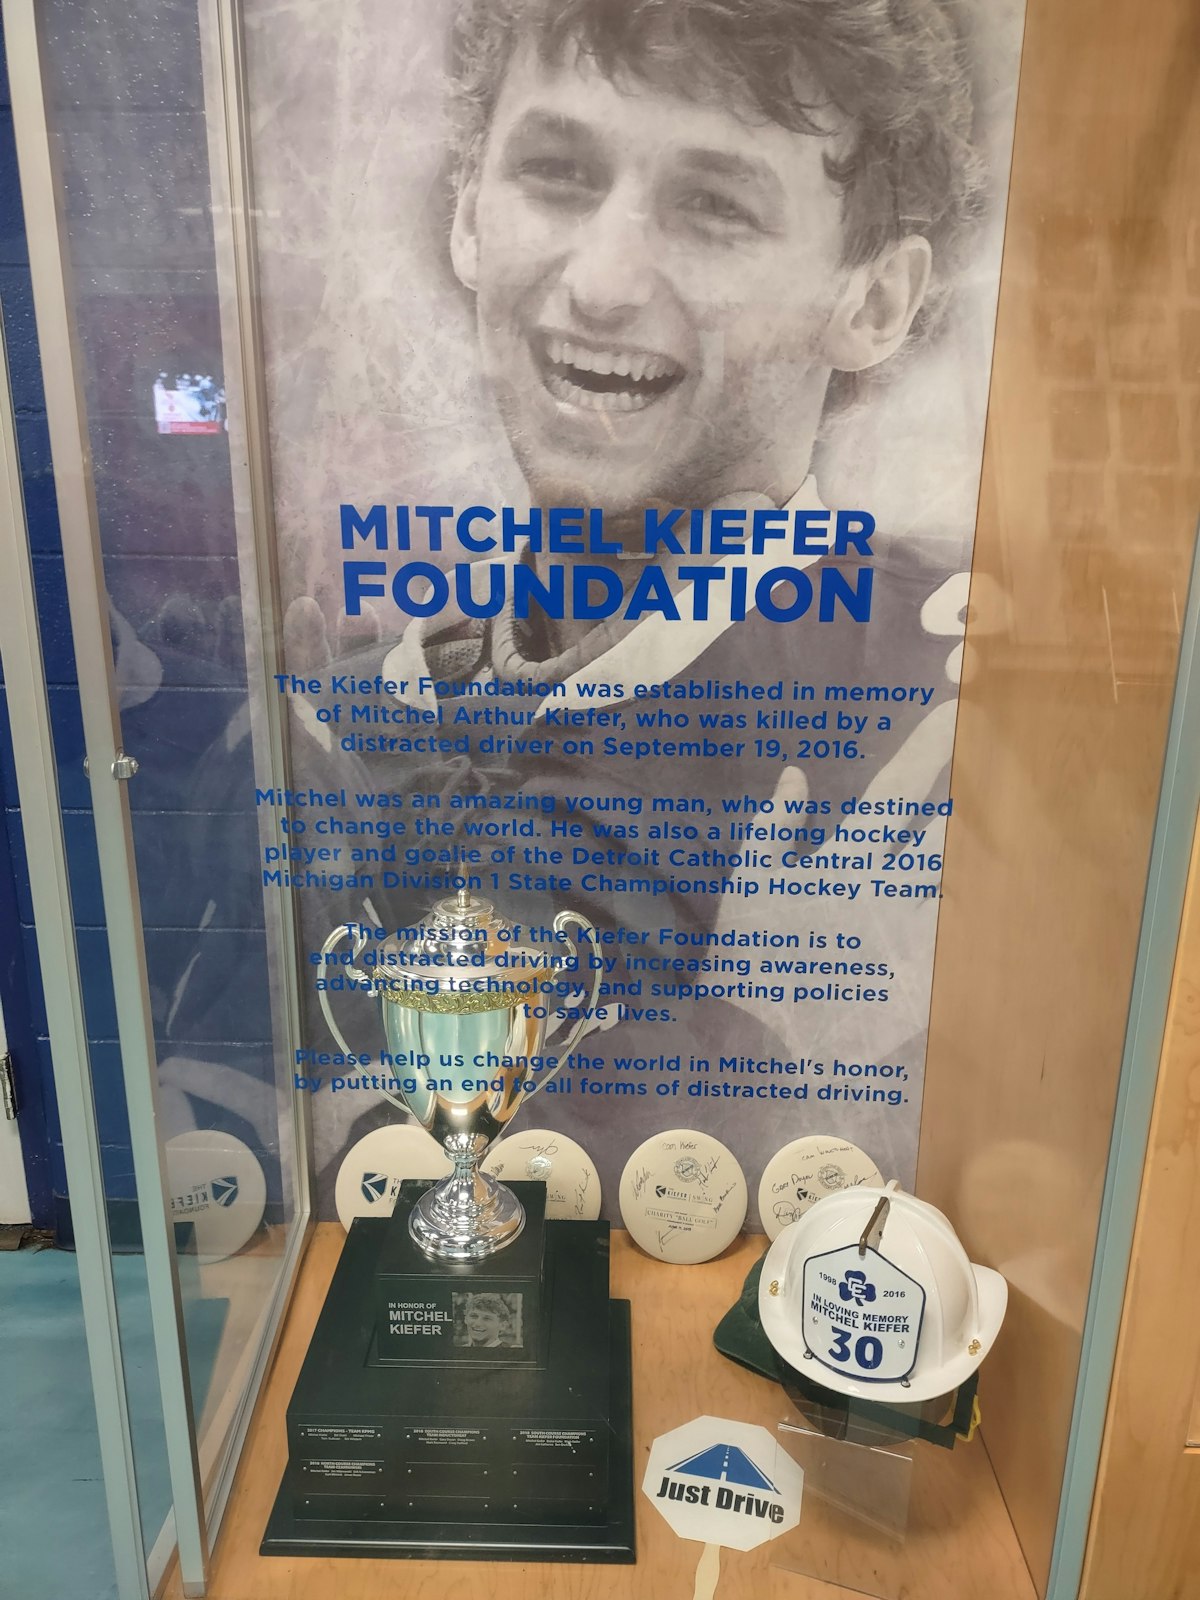 Mitchel Kiefer was only a few months past his graduation from Novi Detroit Catholic Central when hit by a distracted driver on the way to Michigan State University in East Lansing. A showcase at U.S.A. Hockey Arena is dedicated to his memory.